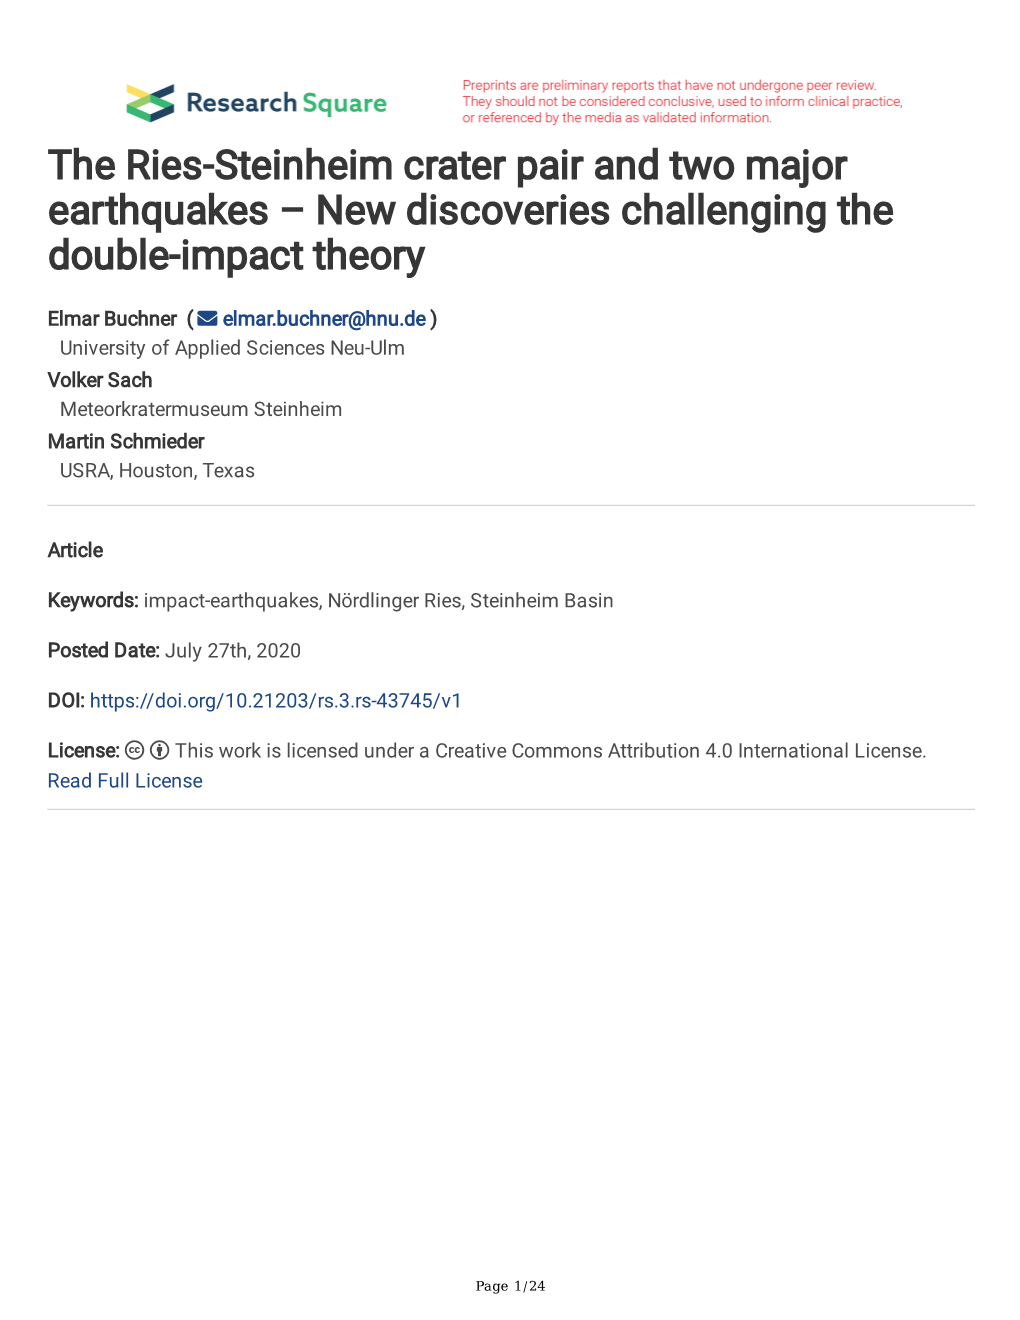 The Ries-Steinheim Crater Pair and Two Major Earthquakes – New Discoveries Challenging the Double-Impact Theory